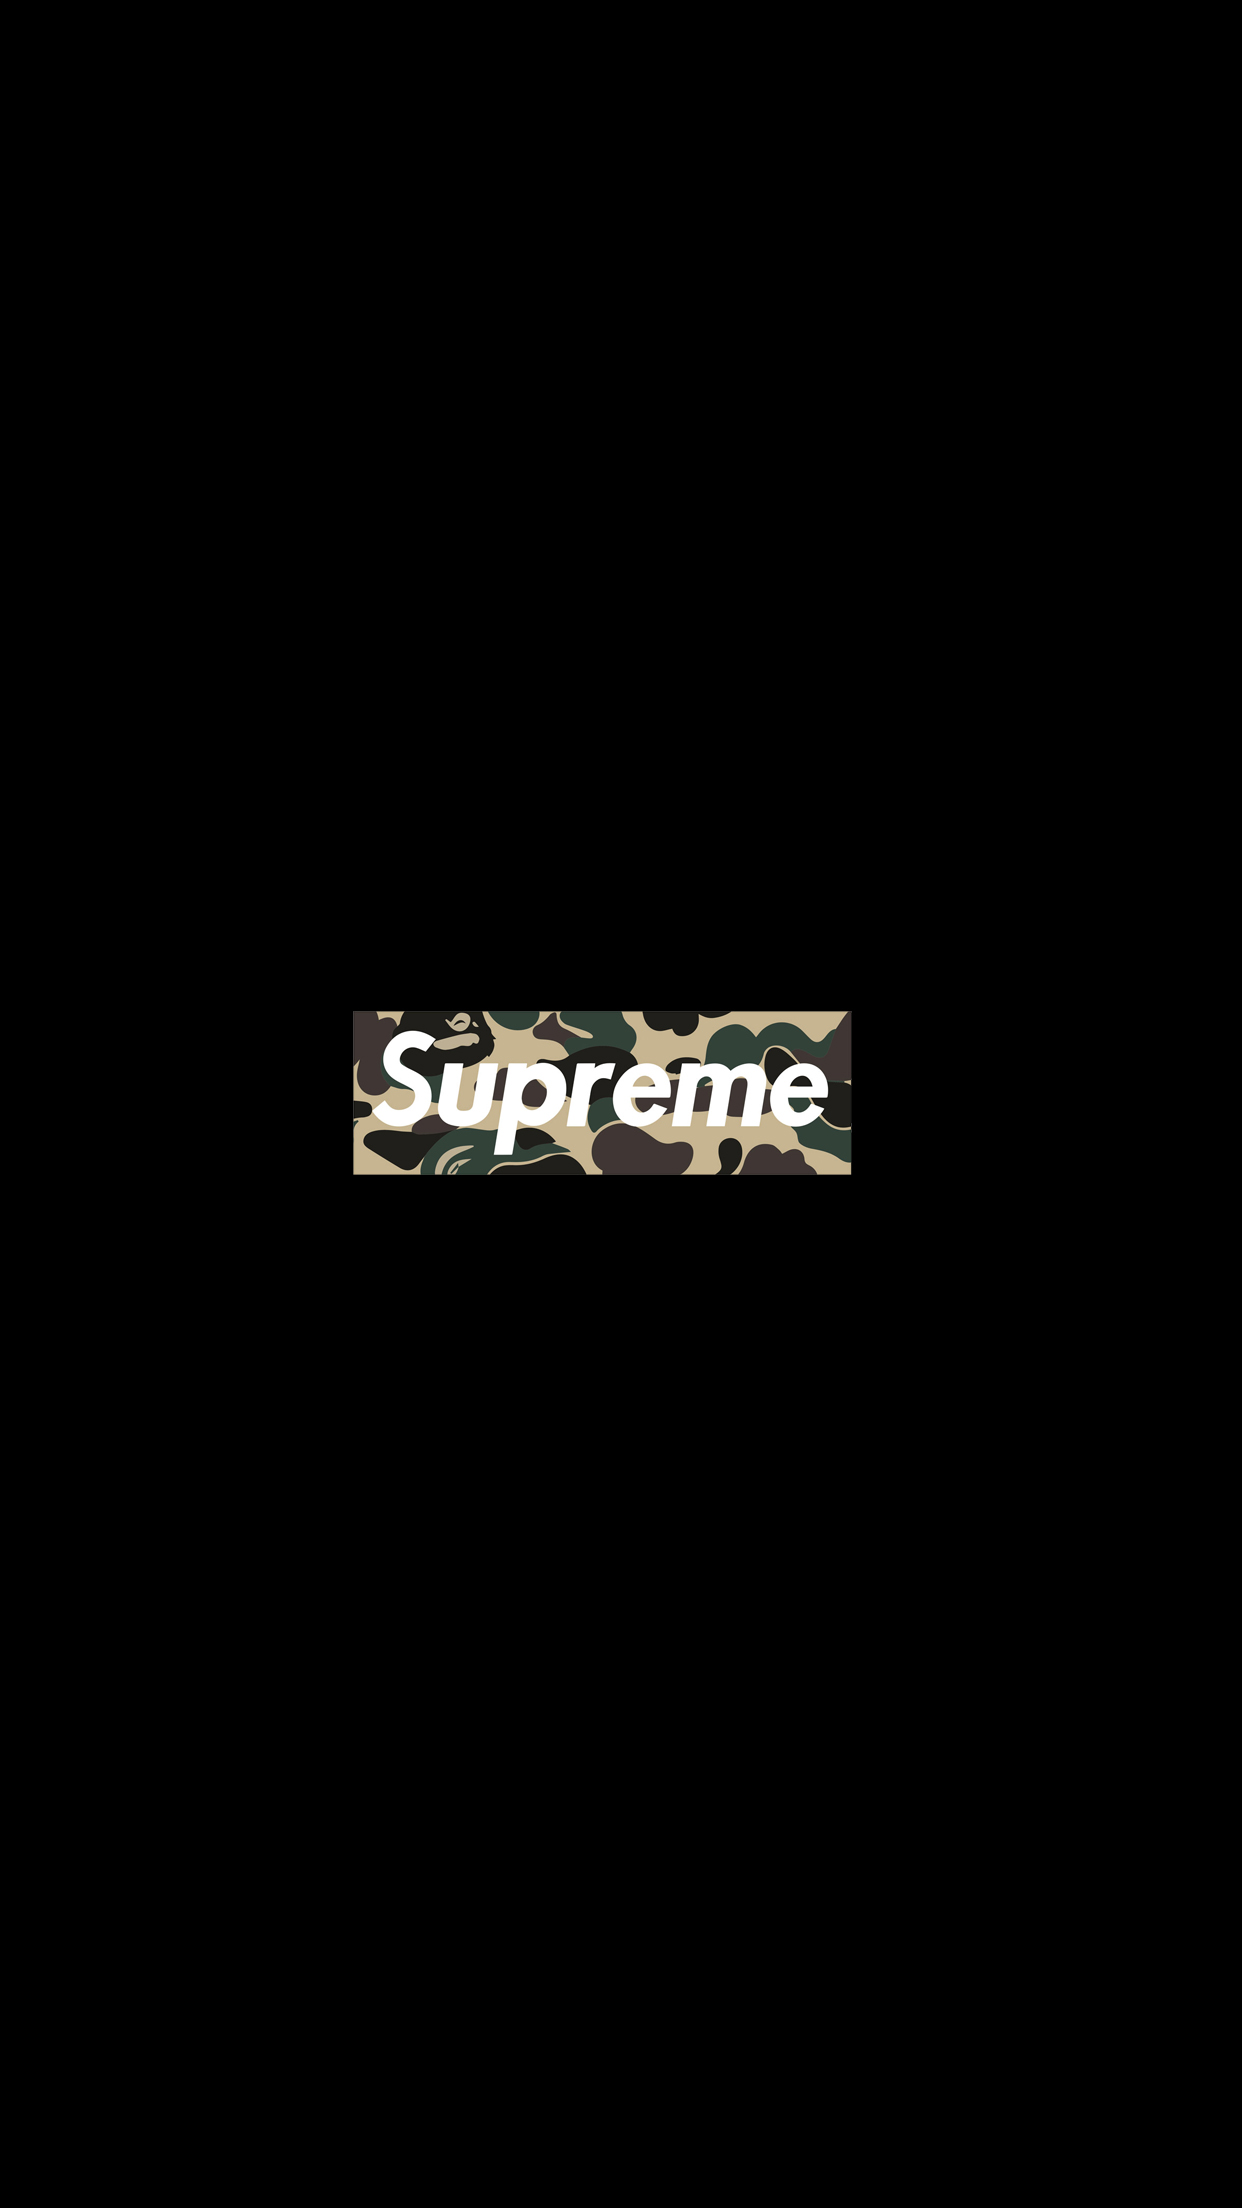 Some Supreme Wallpapers for iPhone   Imgur